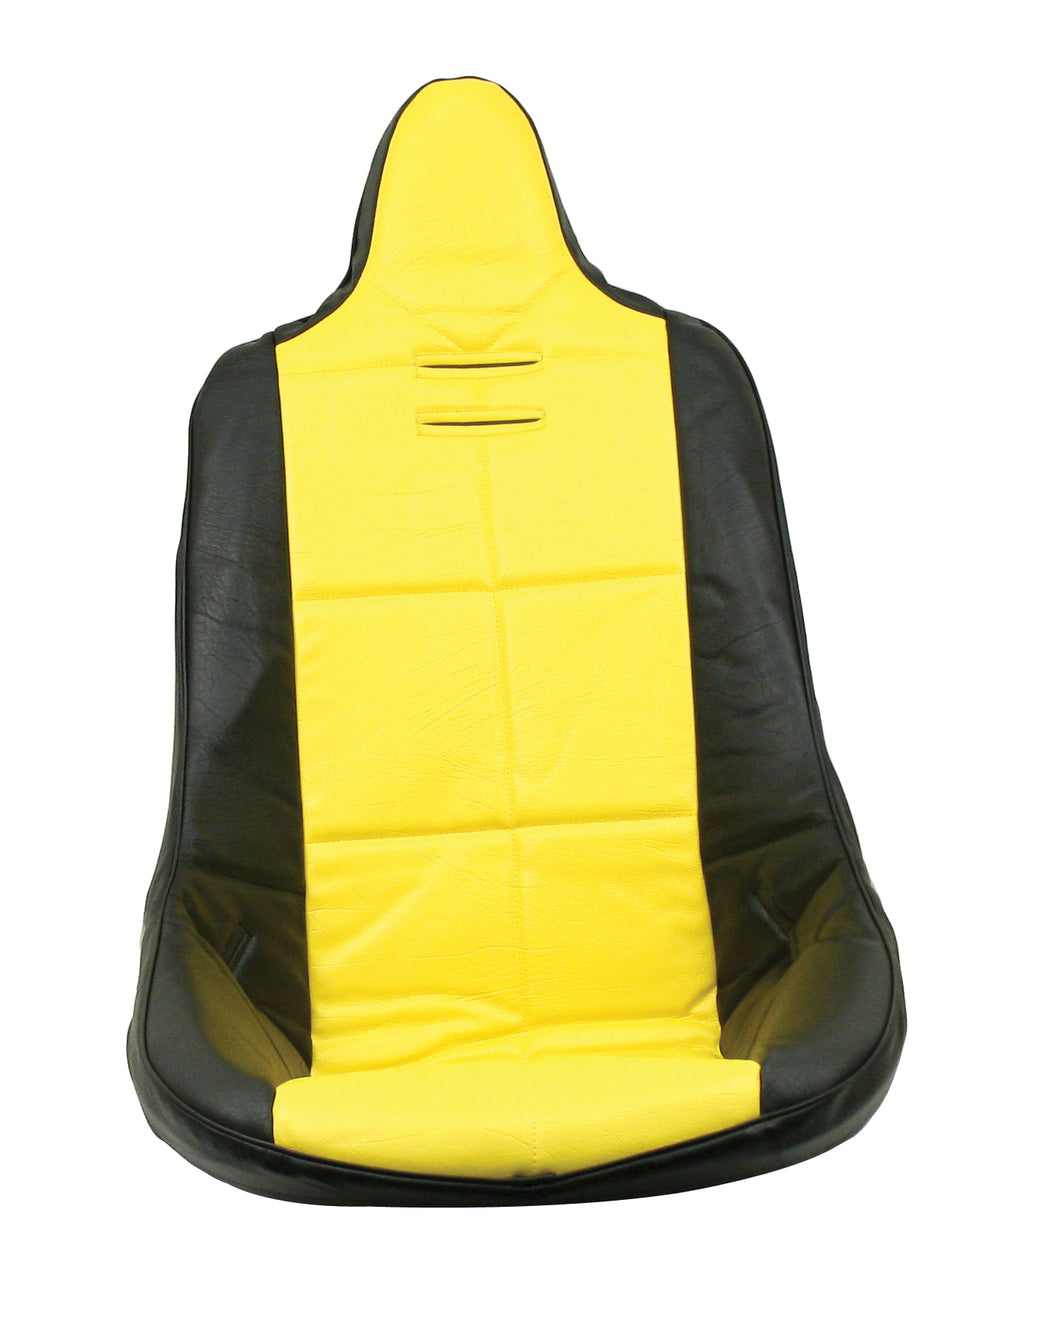 Empi Yellow Seat Cover for Hi Back 2300 Seat - Each - 62-2350